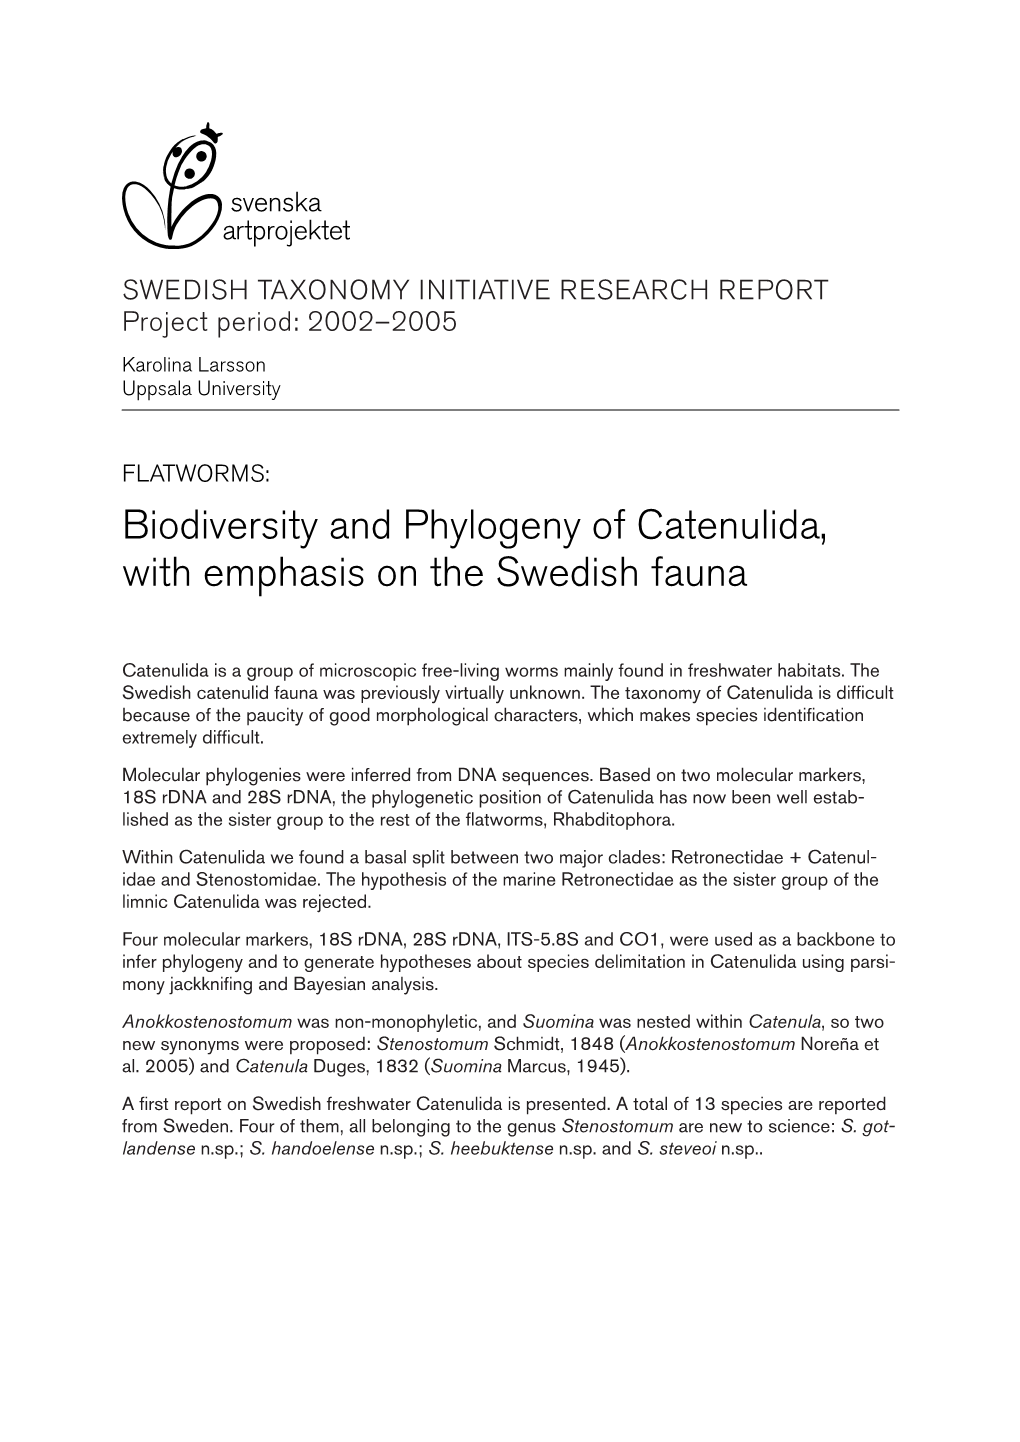 Biodiversity and Phylogeny of Catenulida, with Emphasis on the Swedish Fauna